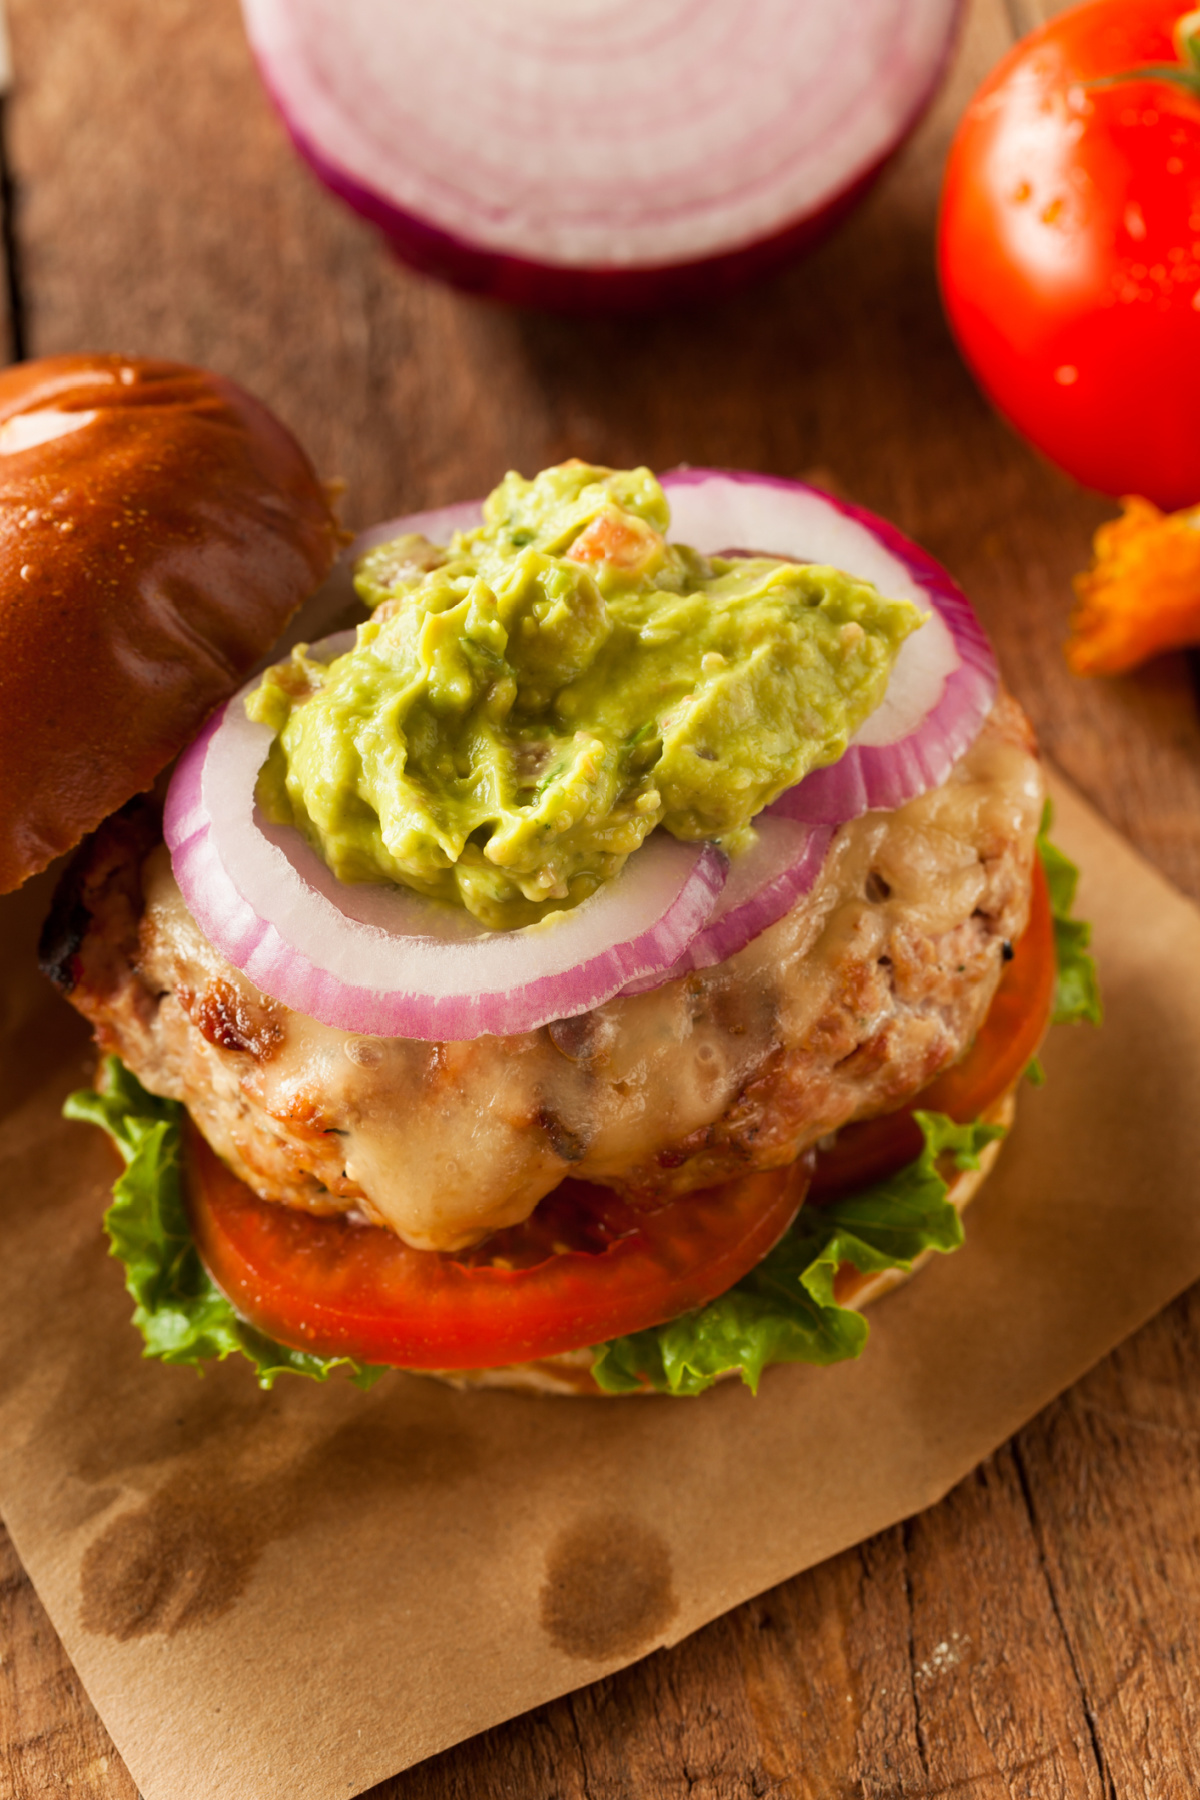 A delicious juicy homemade turkey burger with Gruyere cheese on a bun topped with sliced onion and guacamole